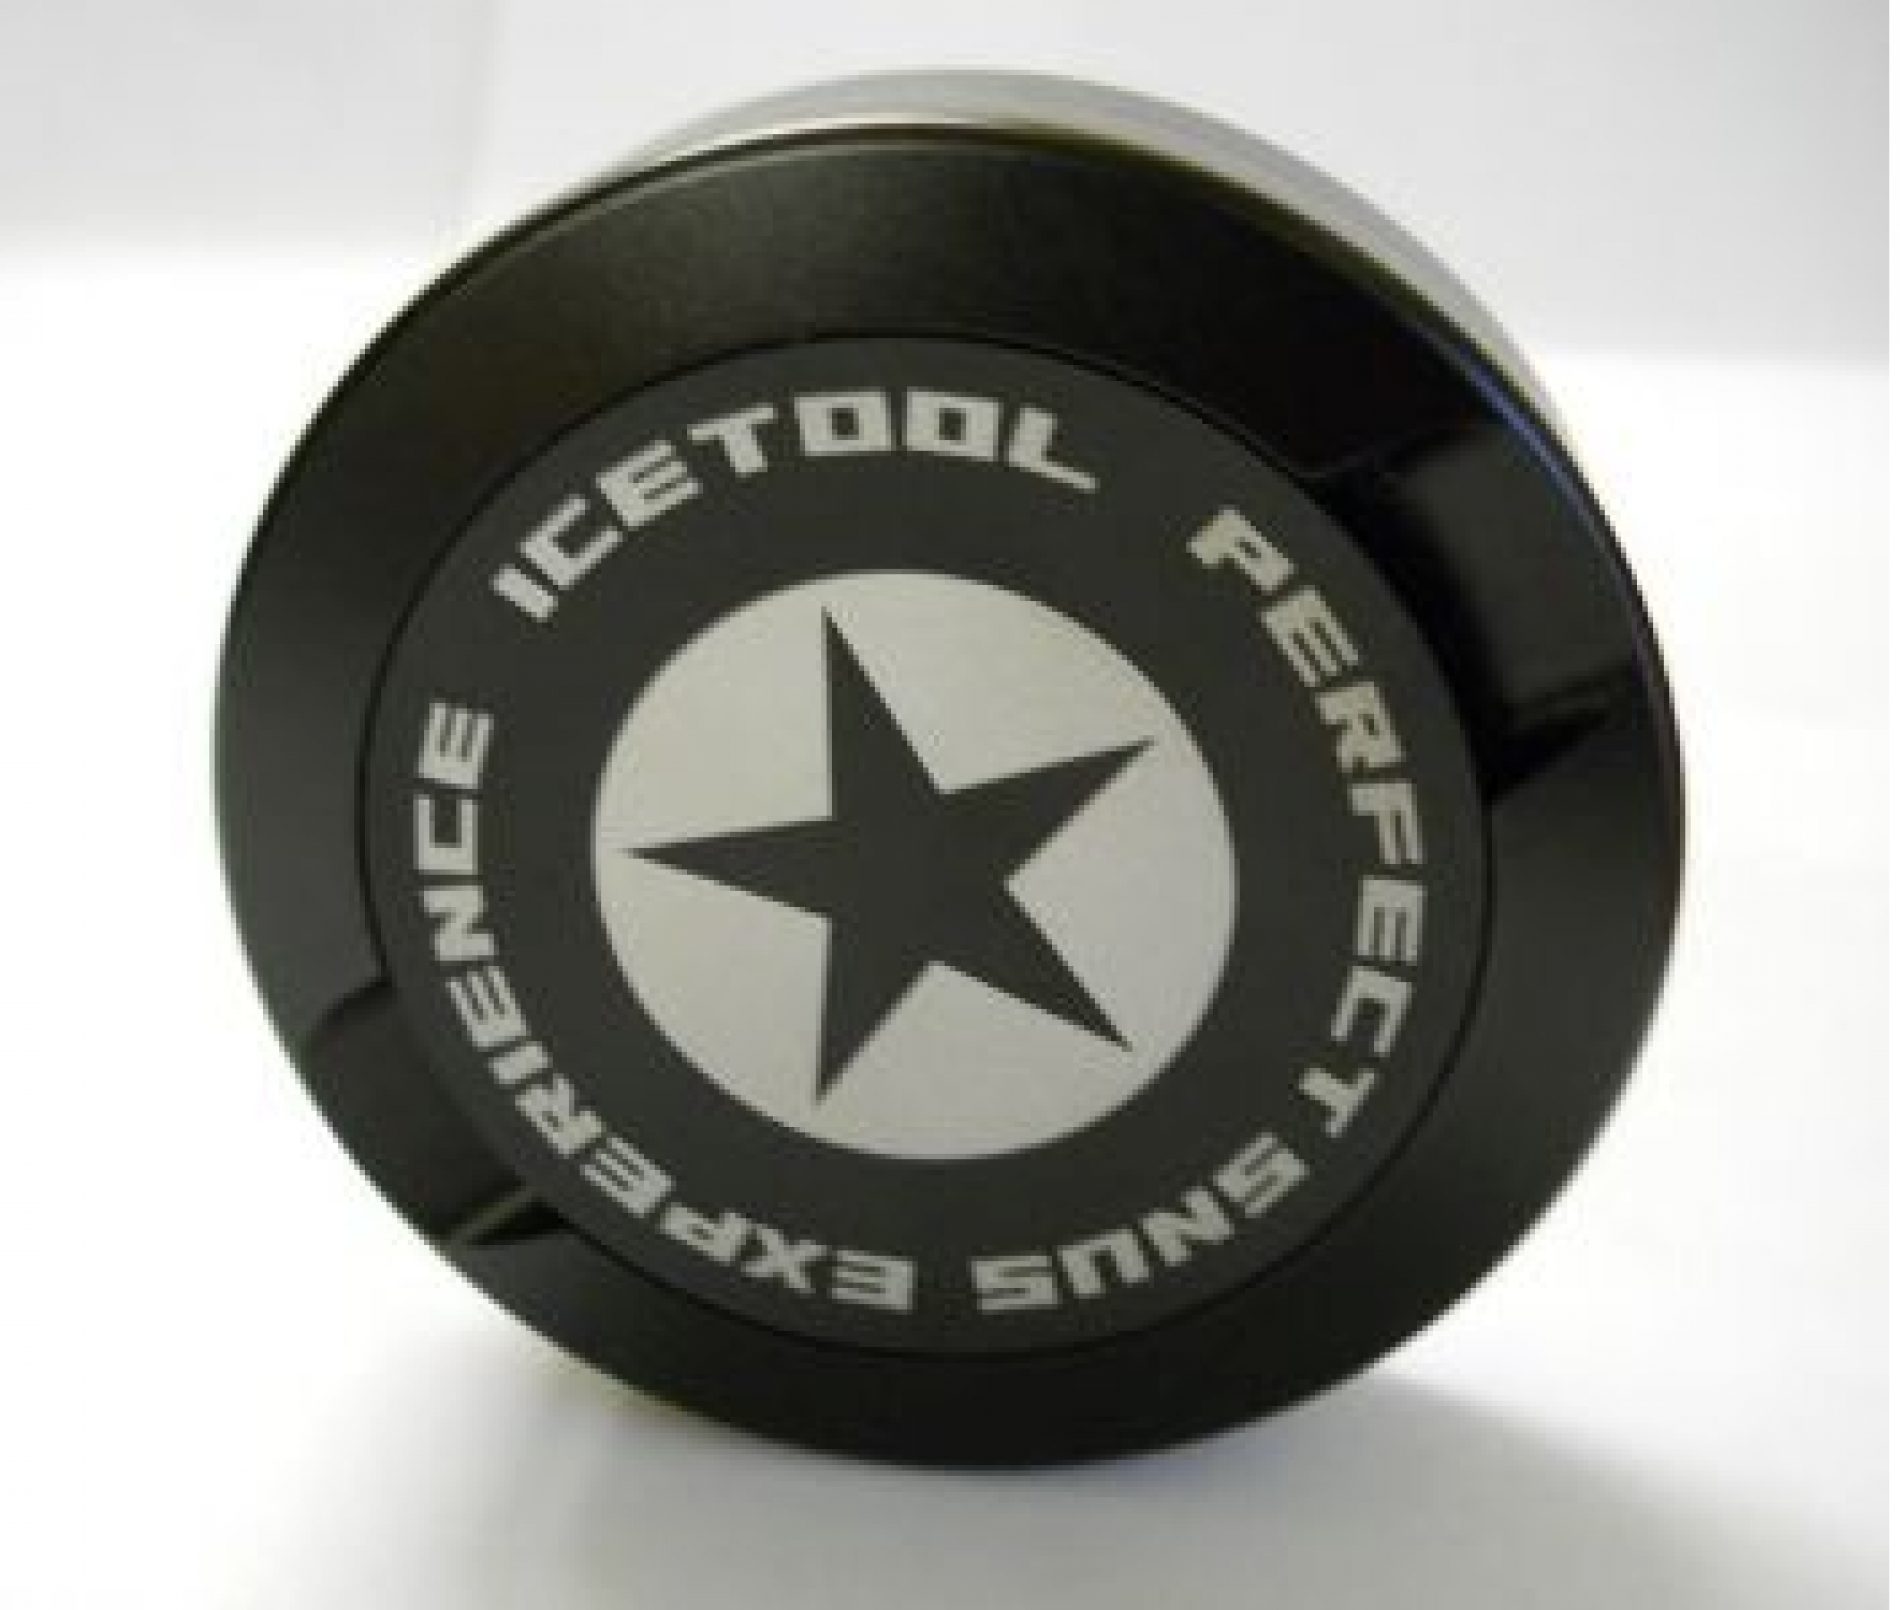 Icetool Lid Box Portion Snus Can Review - SnusCENTRAL